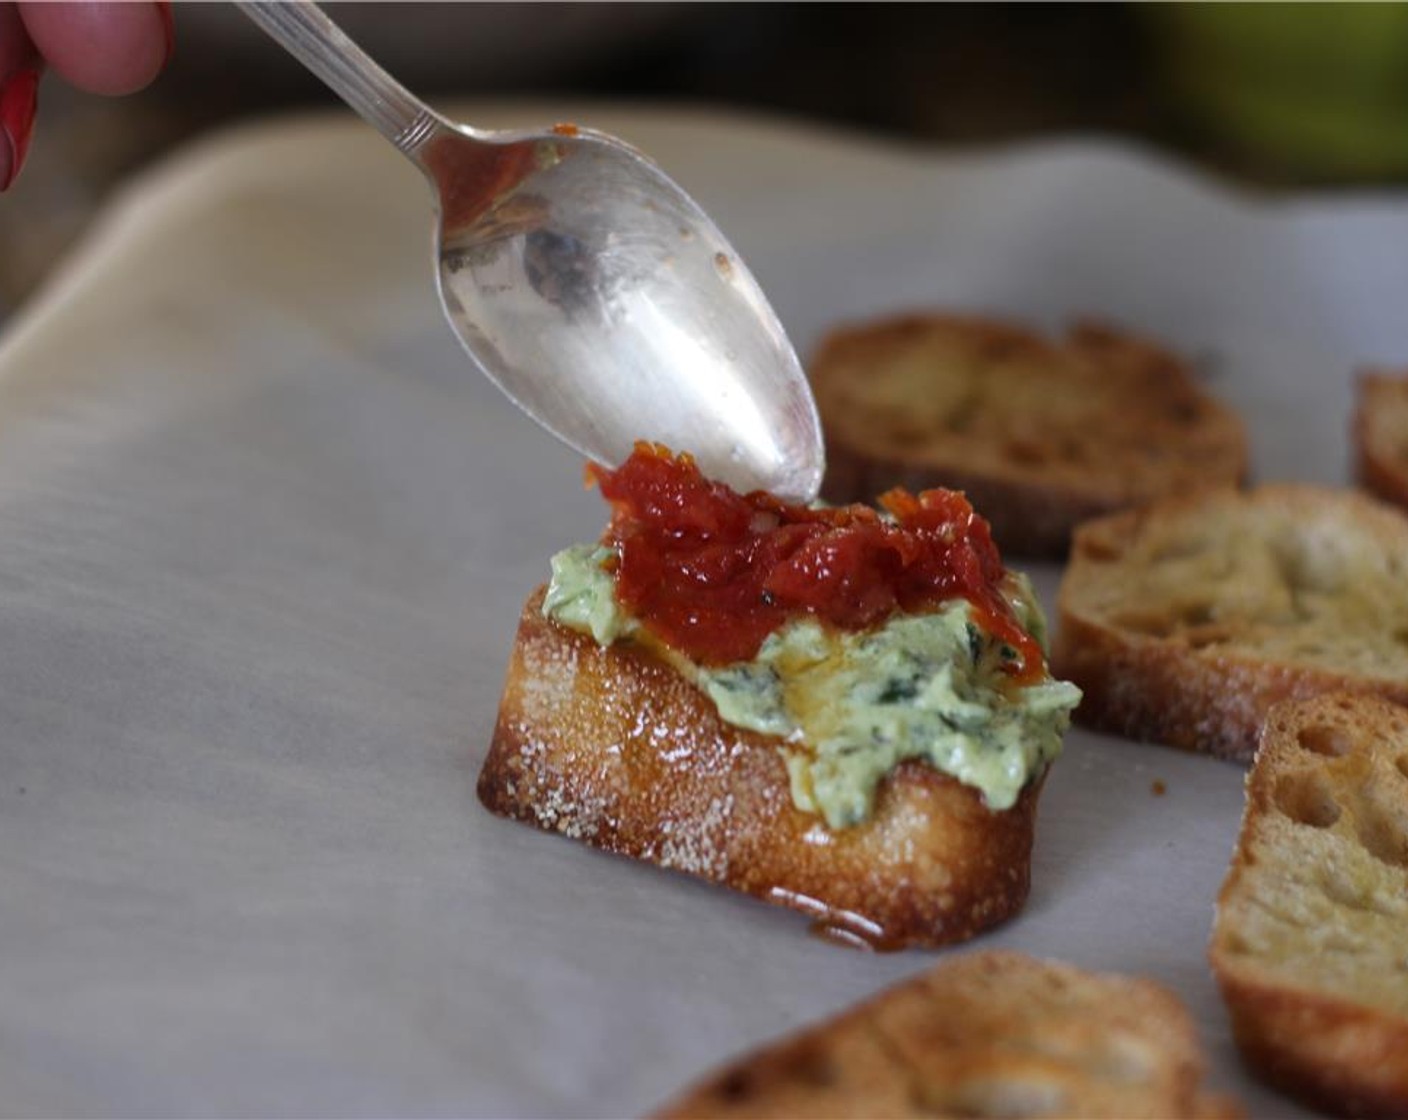 step 8 To assemble the crostini, spread a layer of creamy pesto, followed by a dollop of roasted tomatoes. Drizzle with balsamic glaze and serve immediately.